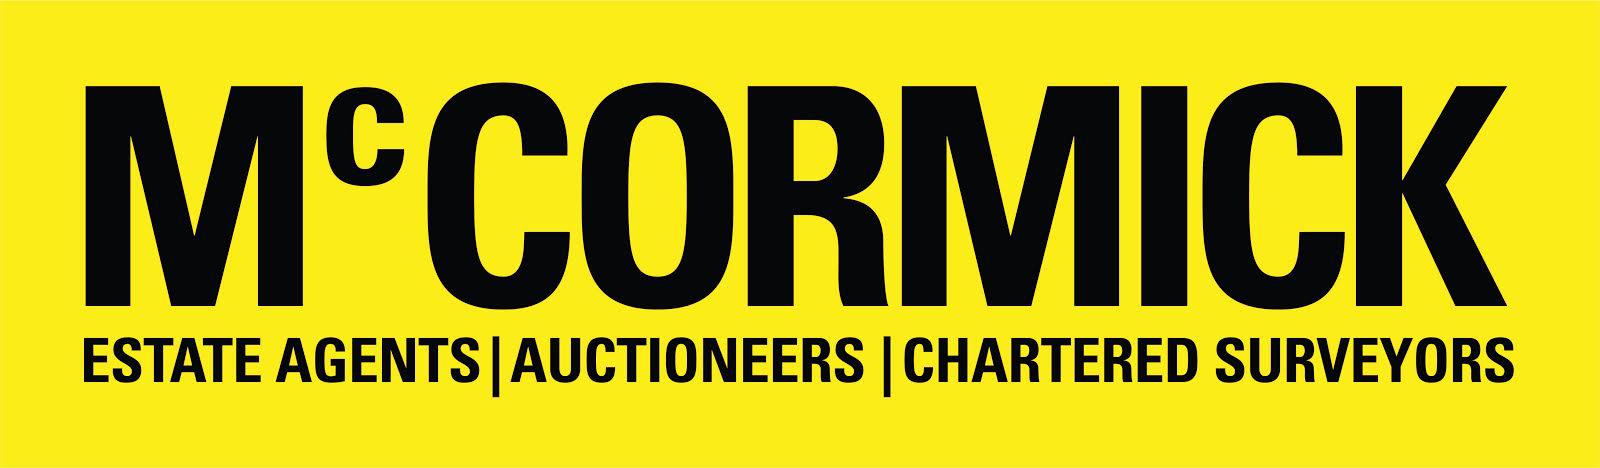 McCormick - Estate Agents, Auctioneers, Chartered Surveryors